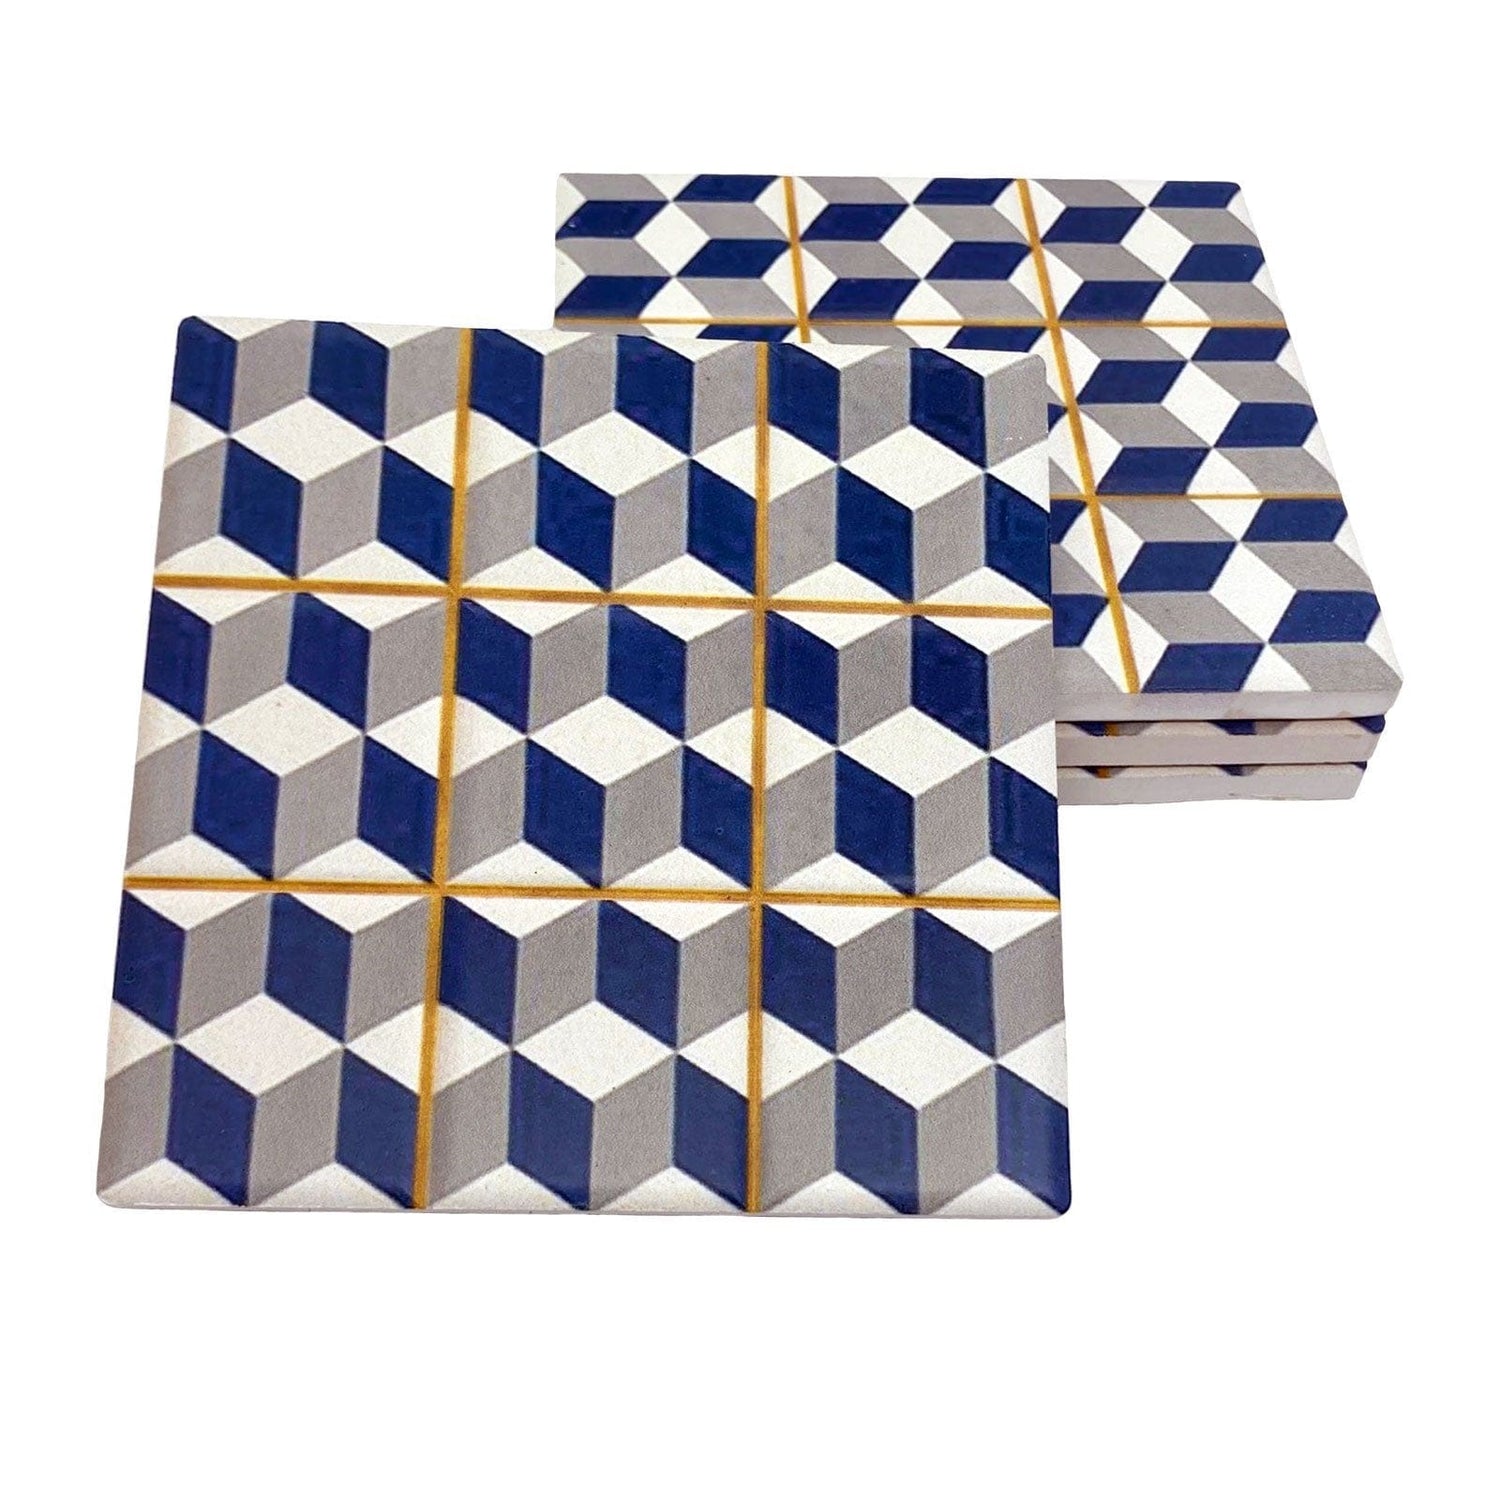 Blue and Grey Moroccan Tile Coasters - Design 10 - Set of 4